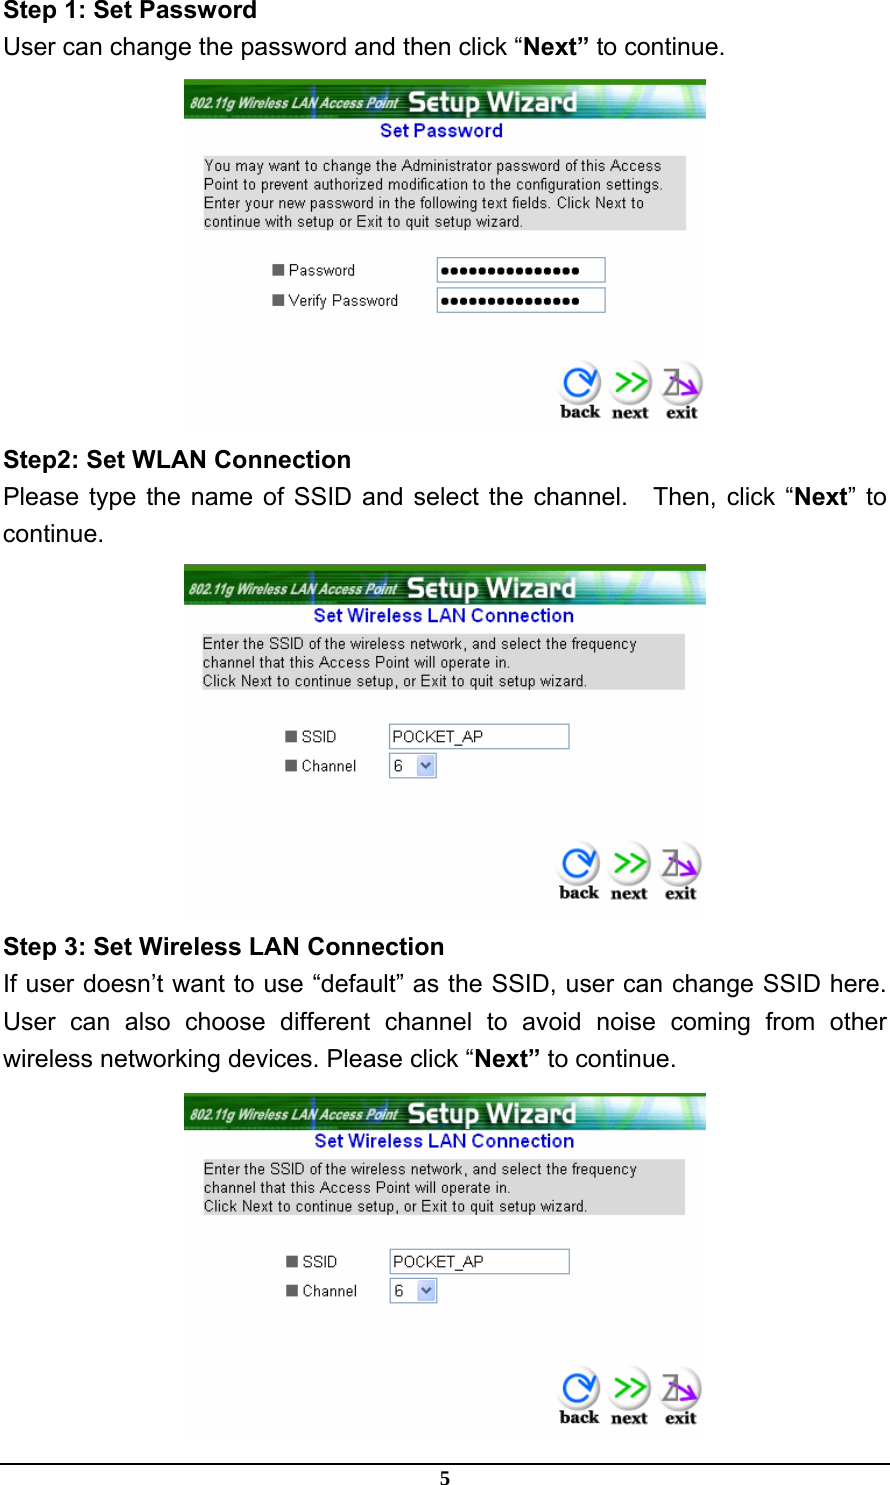 5 Step 1: Set Password User can change the password and then click “Next” to continue.  Step2: Set WLAN Connection Please type the name of SSID and select the channel.  Then, click “Next” to continue.  Step 3: Set Wireless LAN Connection If user doesn’t want to use “default” as the SSID, user can change SSID here. User can also choose different channel to avoid noise coming from other wireless networking devices. Please click “Next” to continue.  